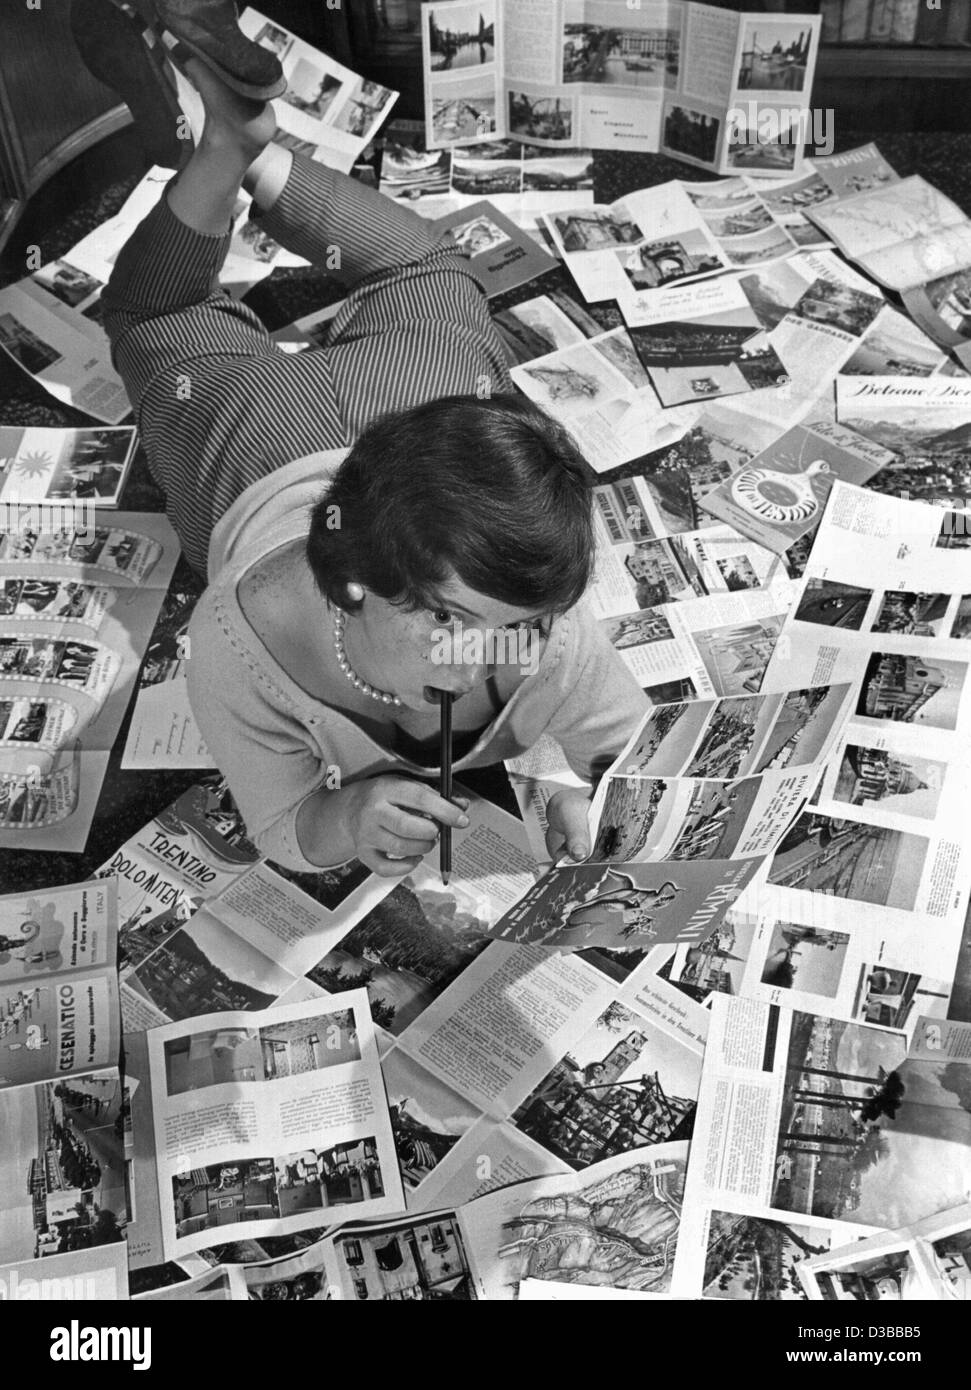 (dpa files) - A young woman studies travel brochures for the 1958 holiday travel season that are spread out around her in a photo taken in 1958.  According to the German travel agencies, holiday travel increased from the previous year. Stock Photo